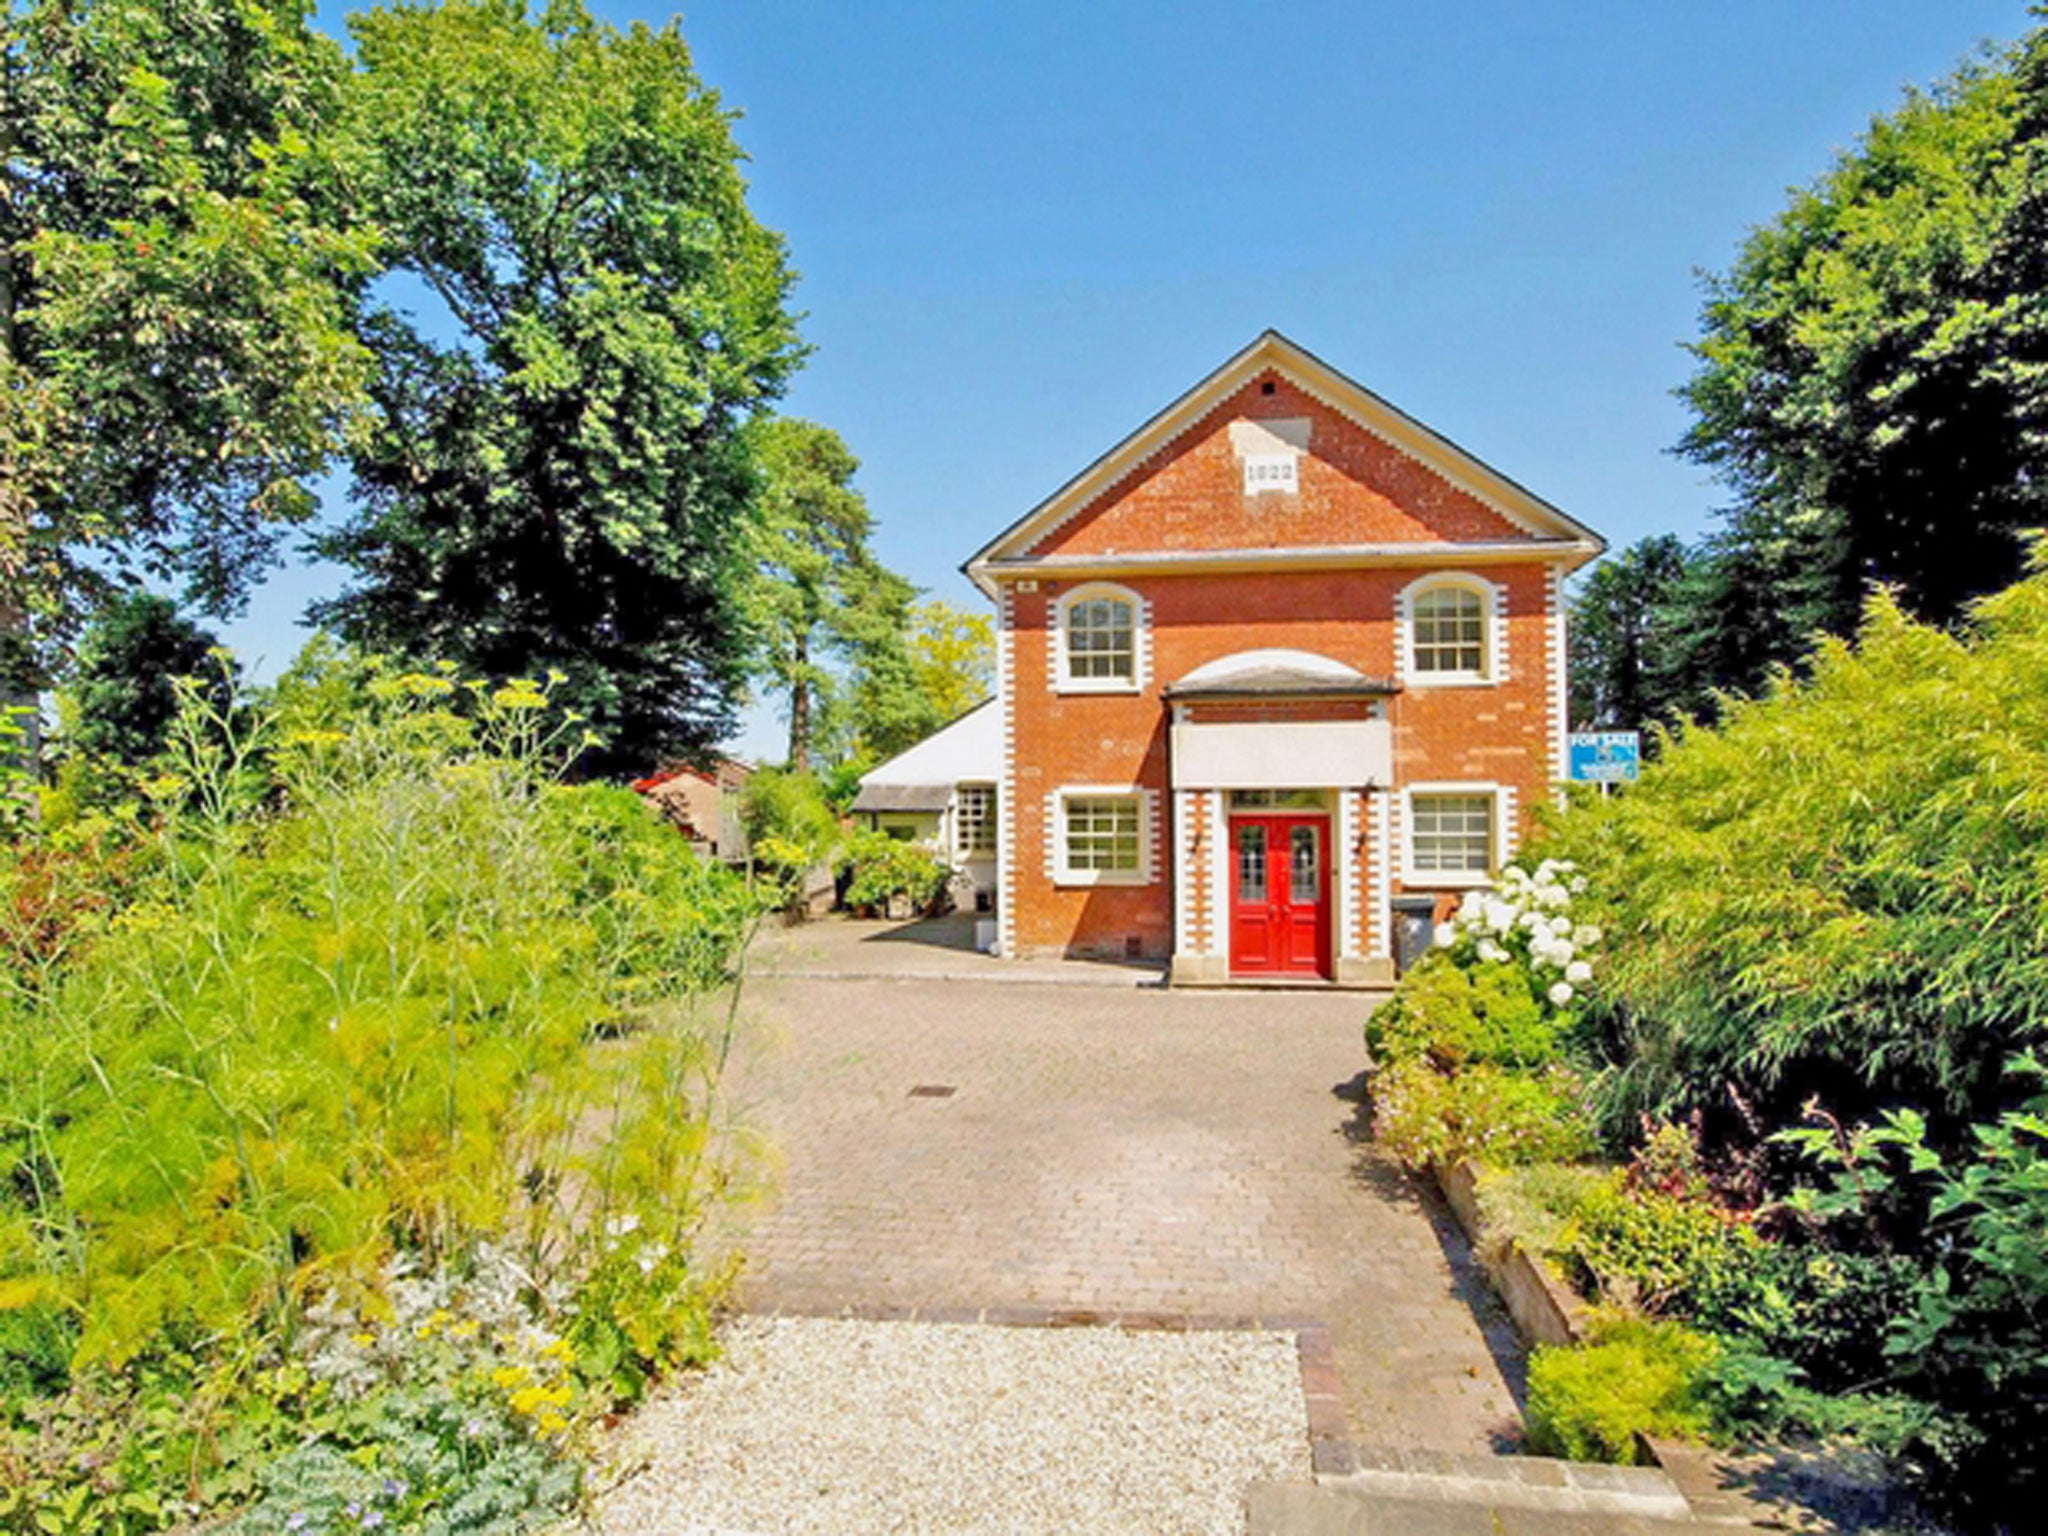 Five bedroom detached house for sale in The Old Chapel, 50 London Road, Saffron Walden CB11. On with Mullocks Wells for £695,000.